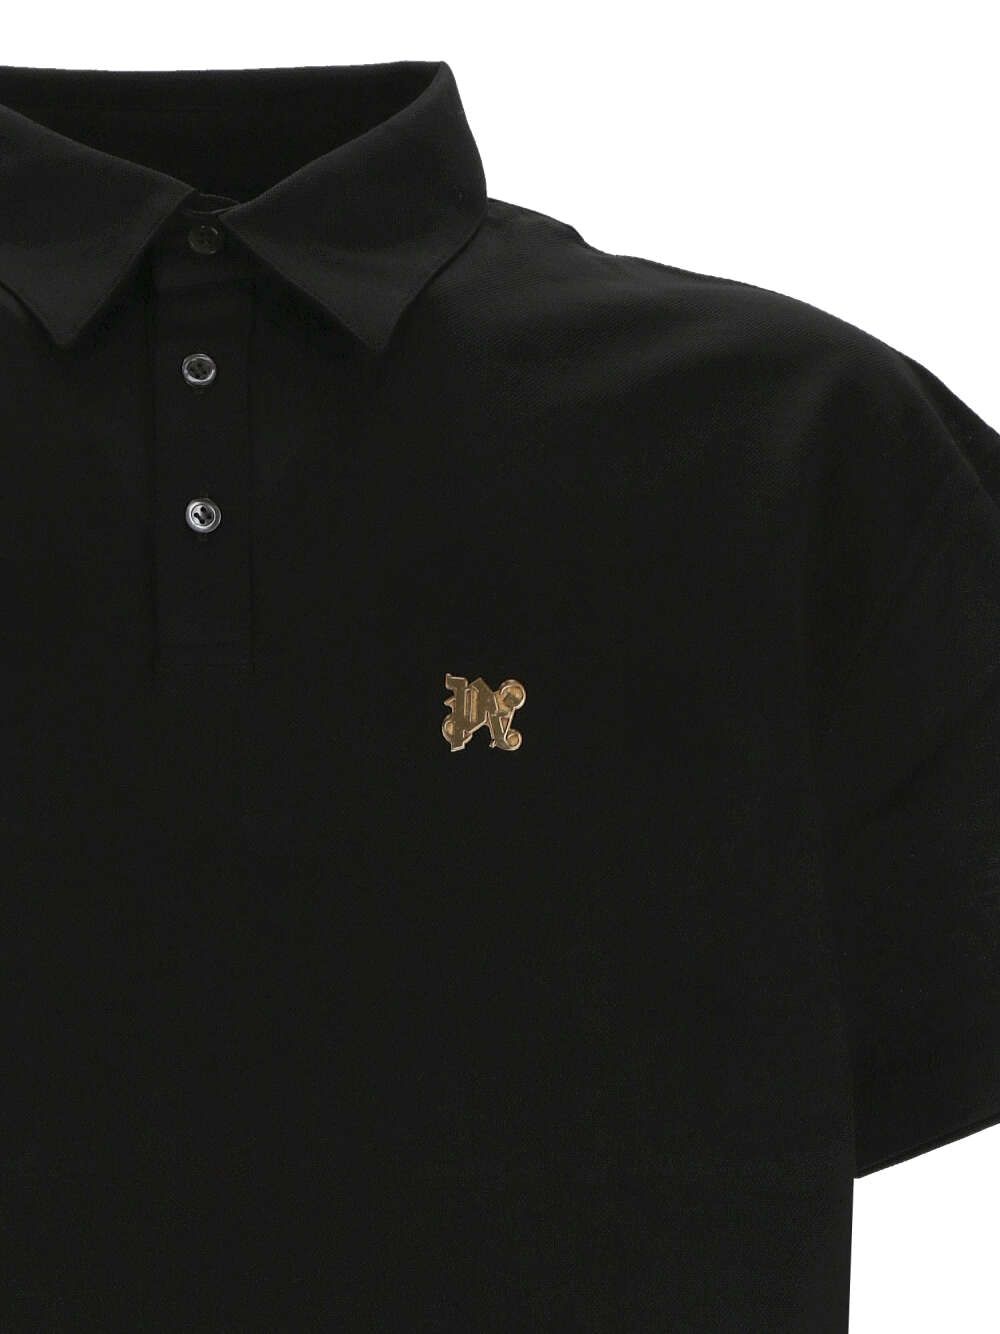 Black polo shirt with logo on the chest